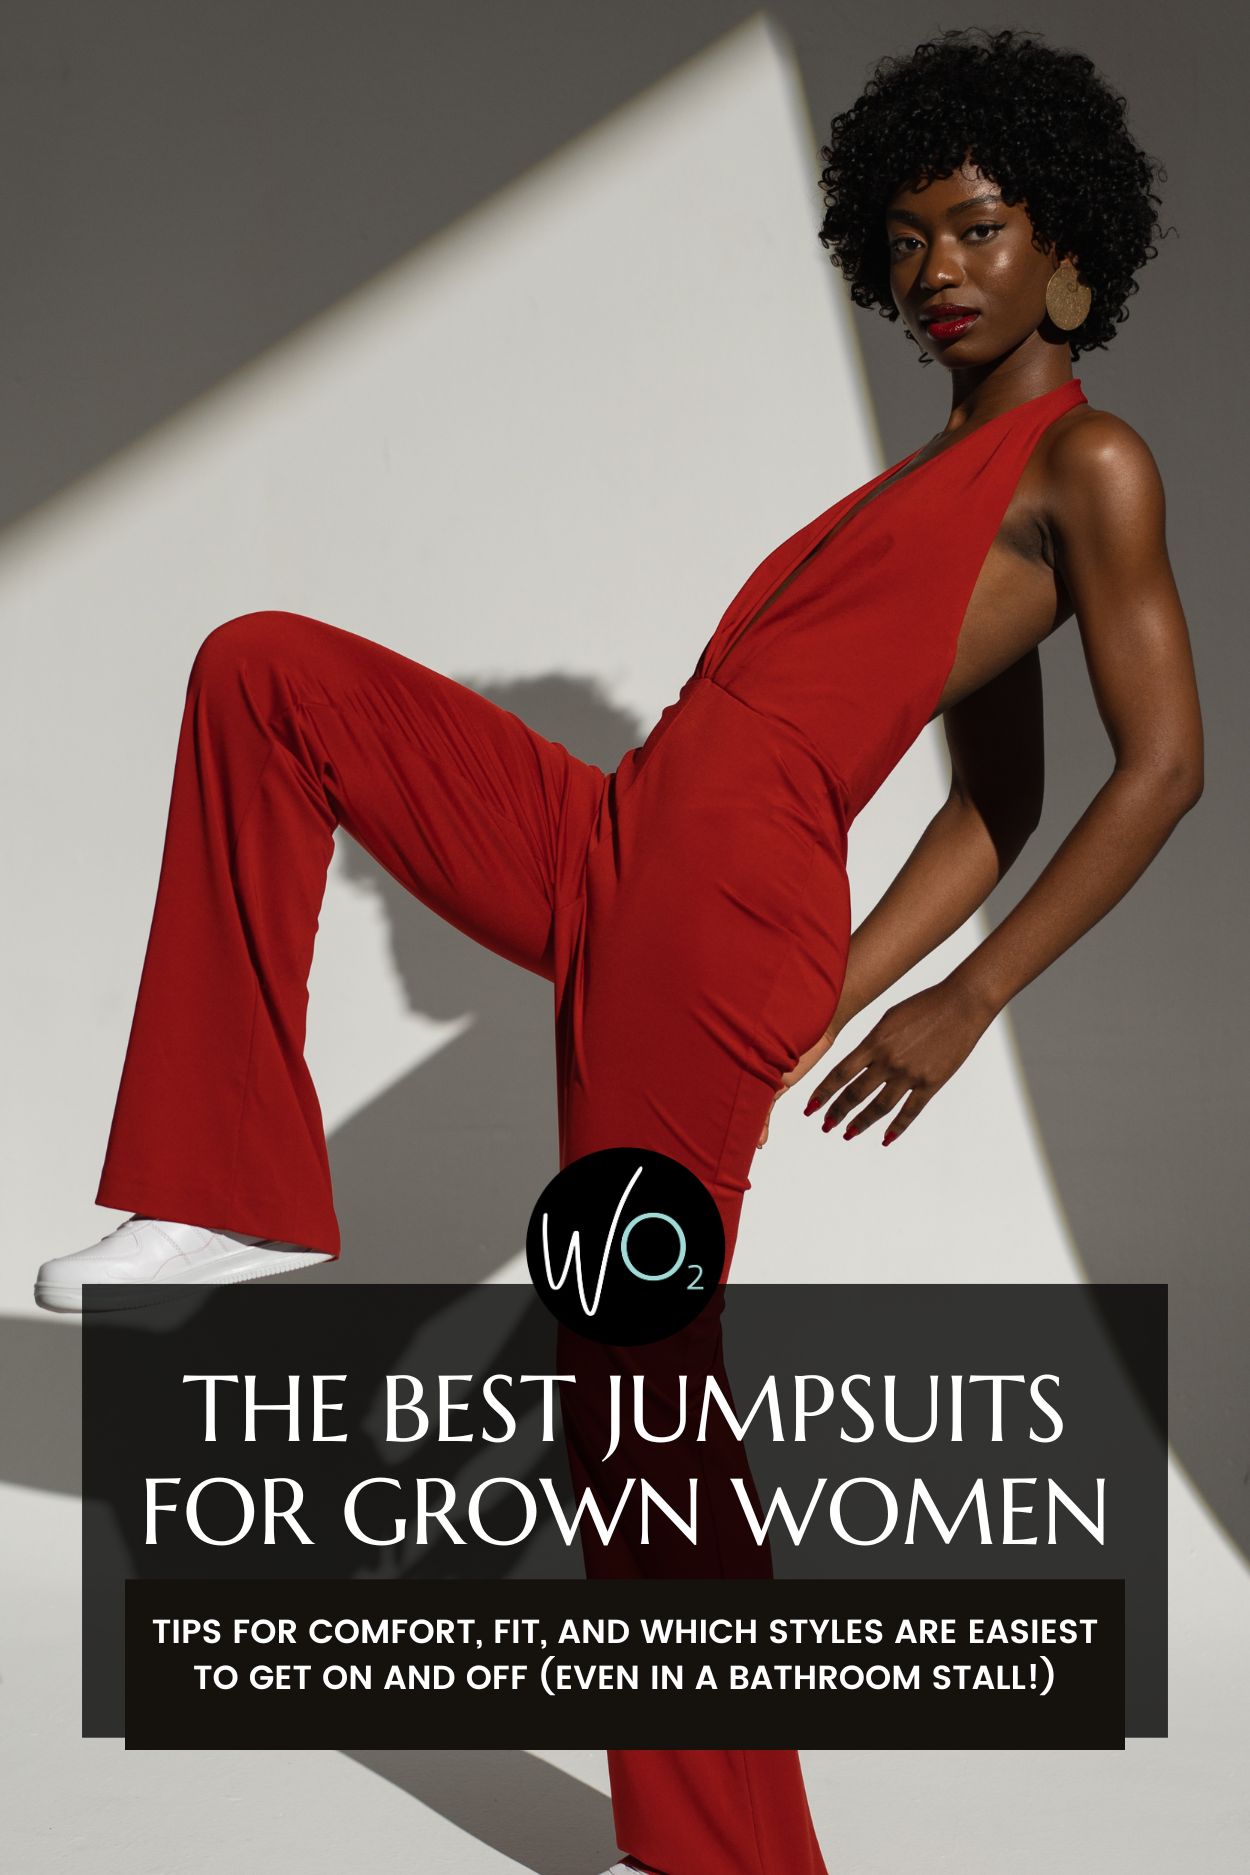 Jumpsuits that Fit, Flatter, and Let You Pee